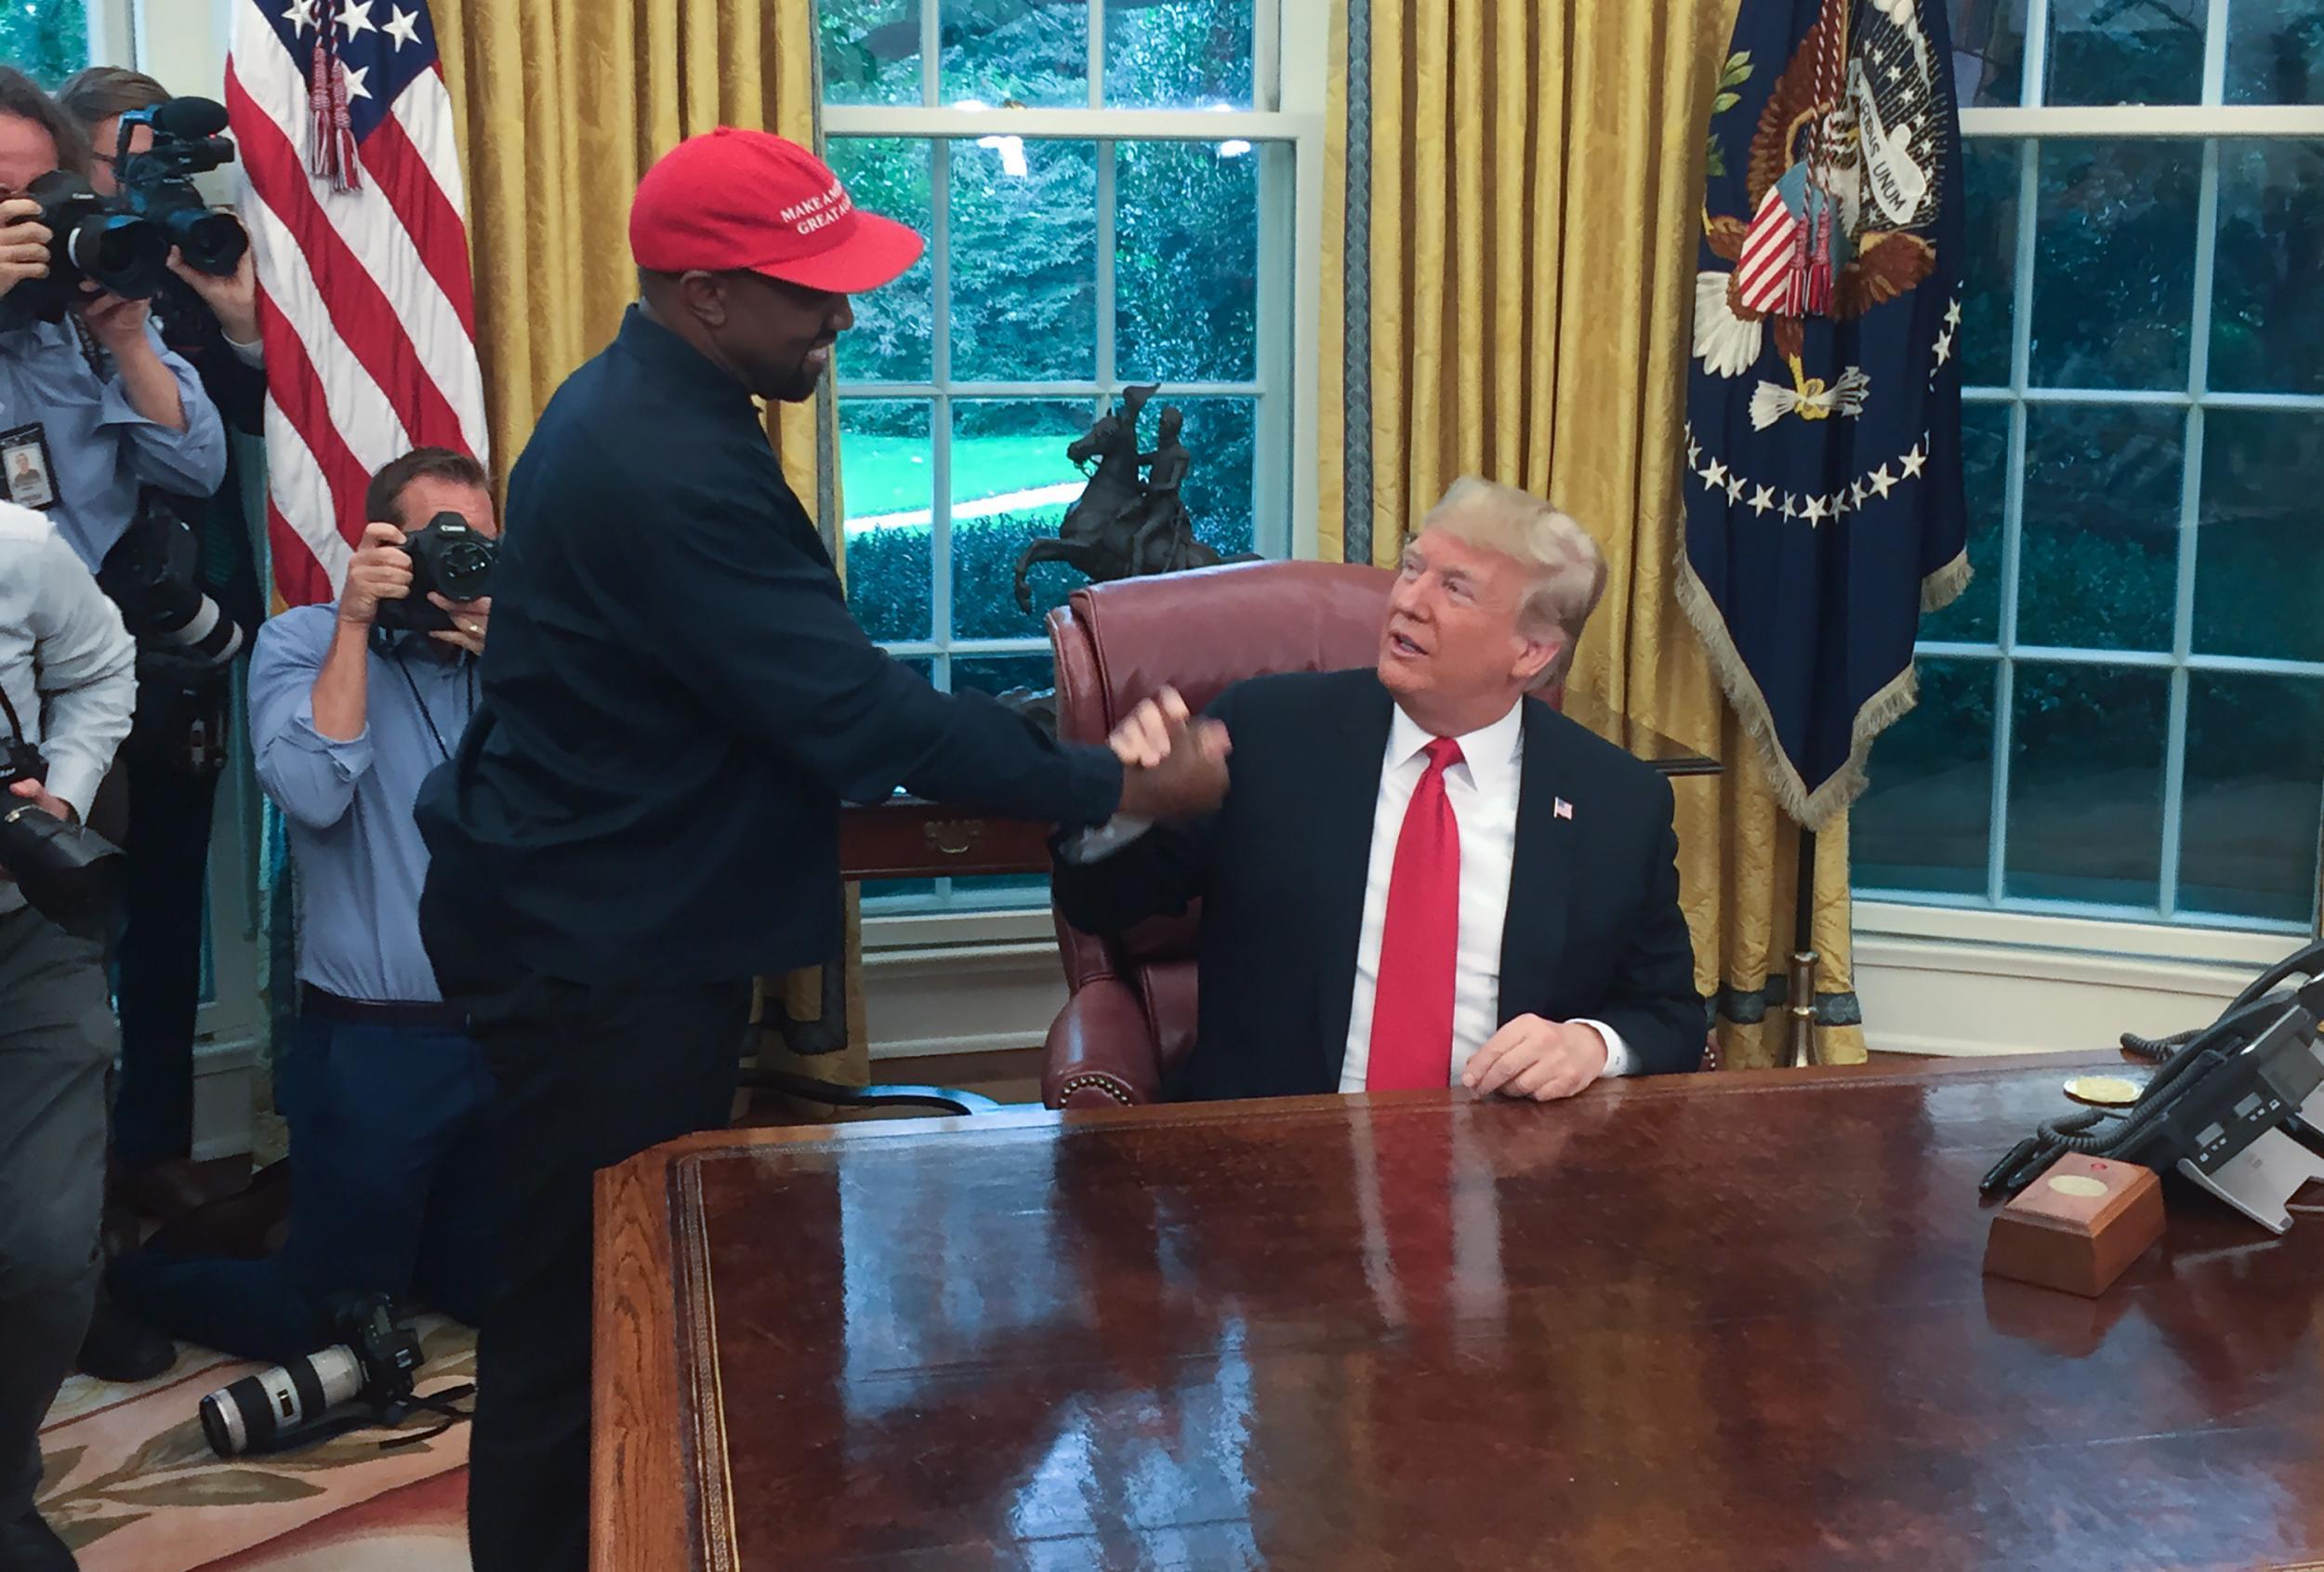 Kanye West visited Trump at the White House in October 2018 (Getty Images)